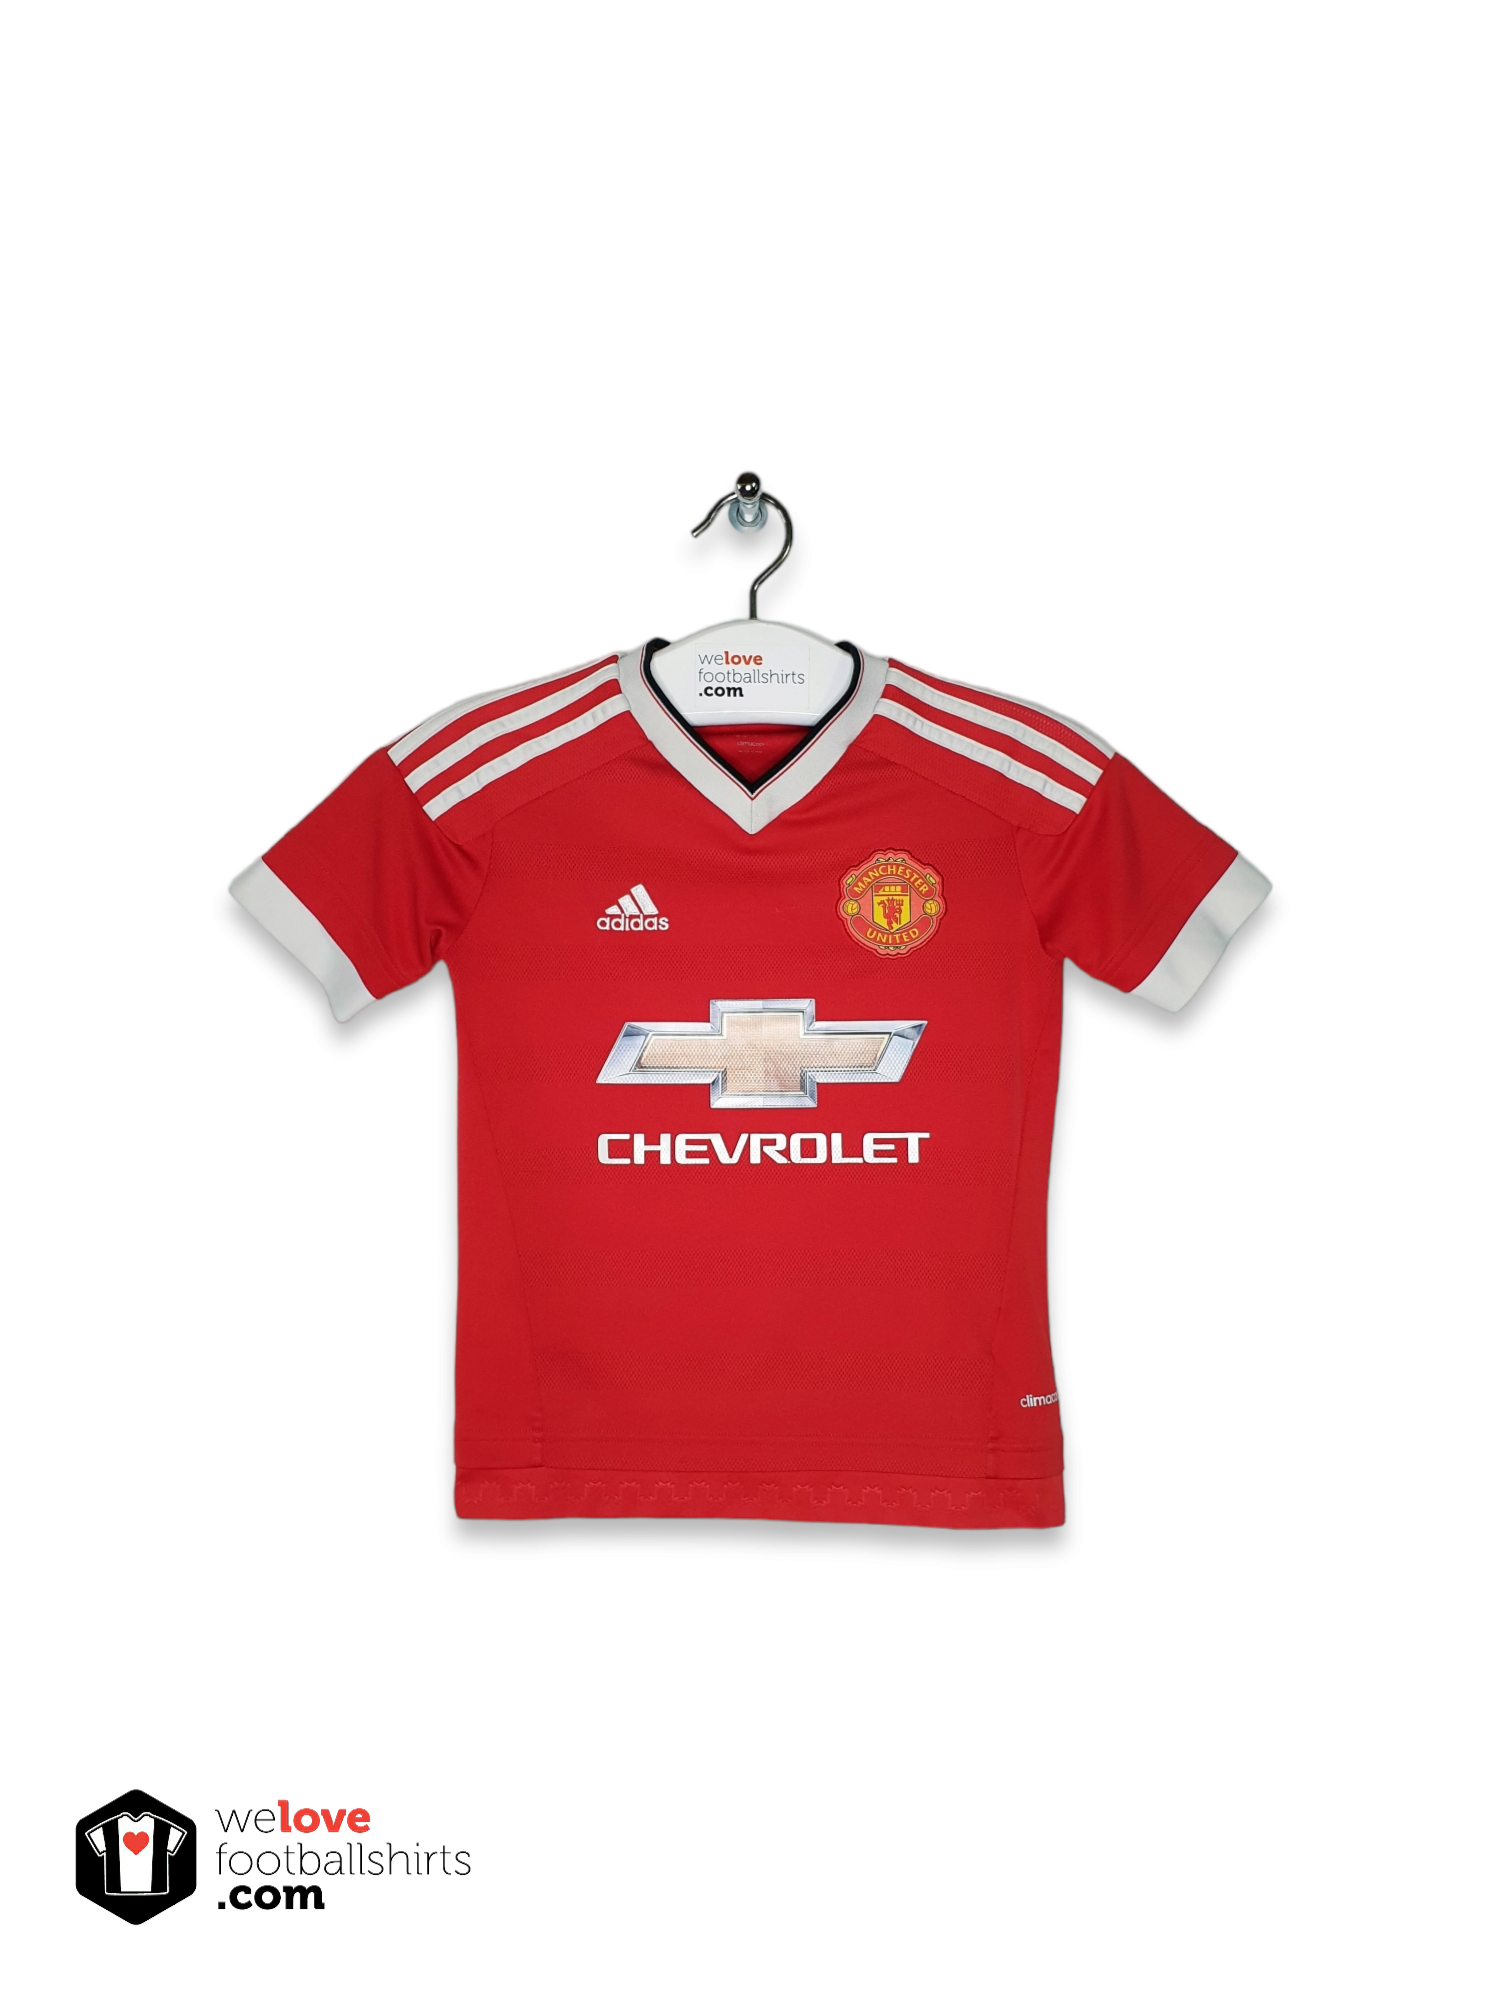 manchester united 2015 jersey